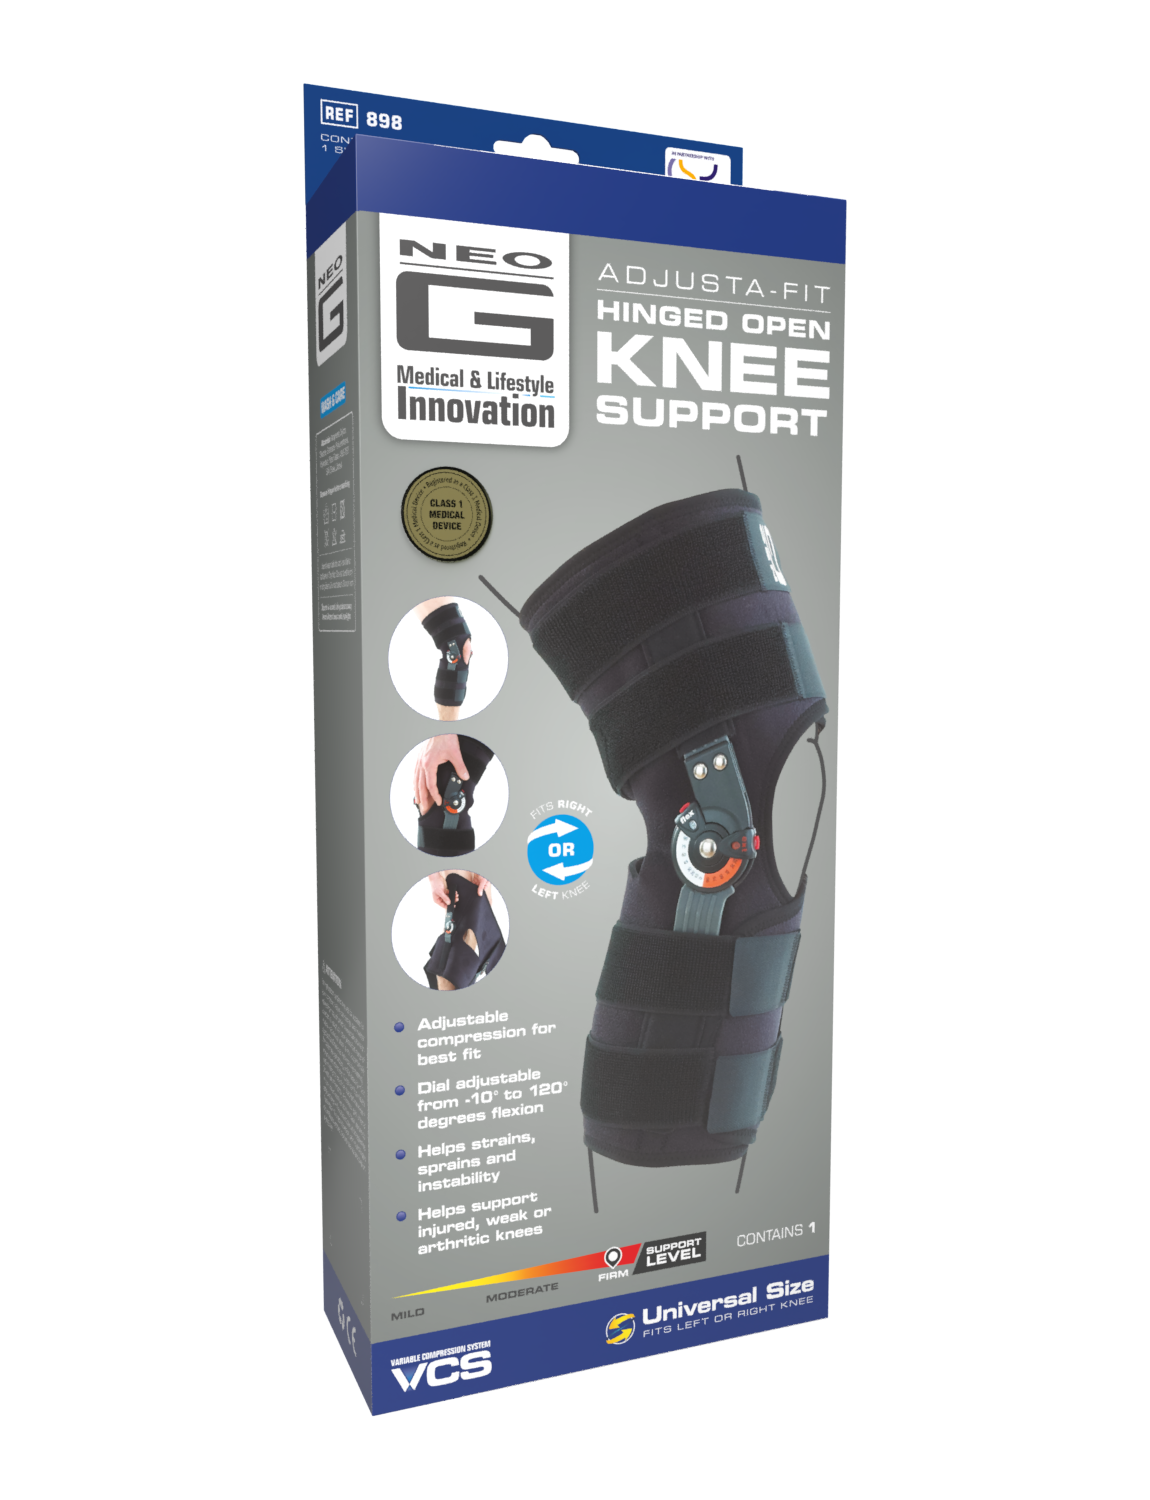 Hinged Open Knee Support Adjusta Fit